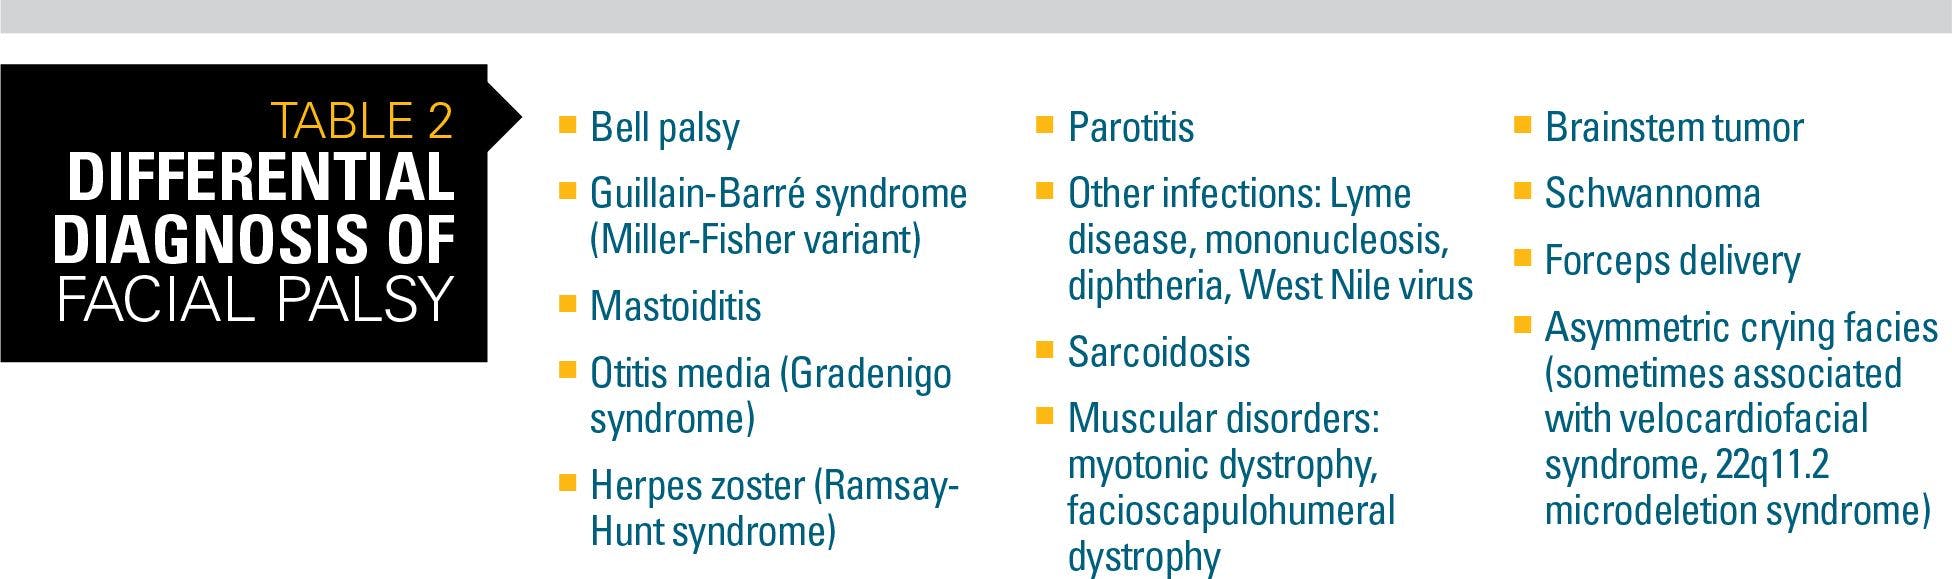 Differential diagnosis of facial palsy